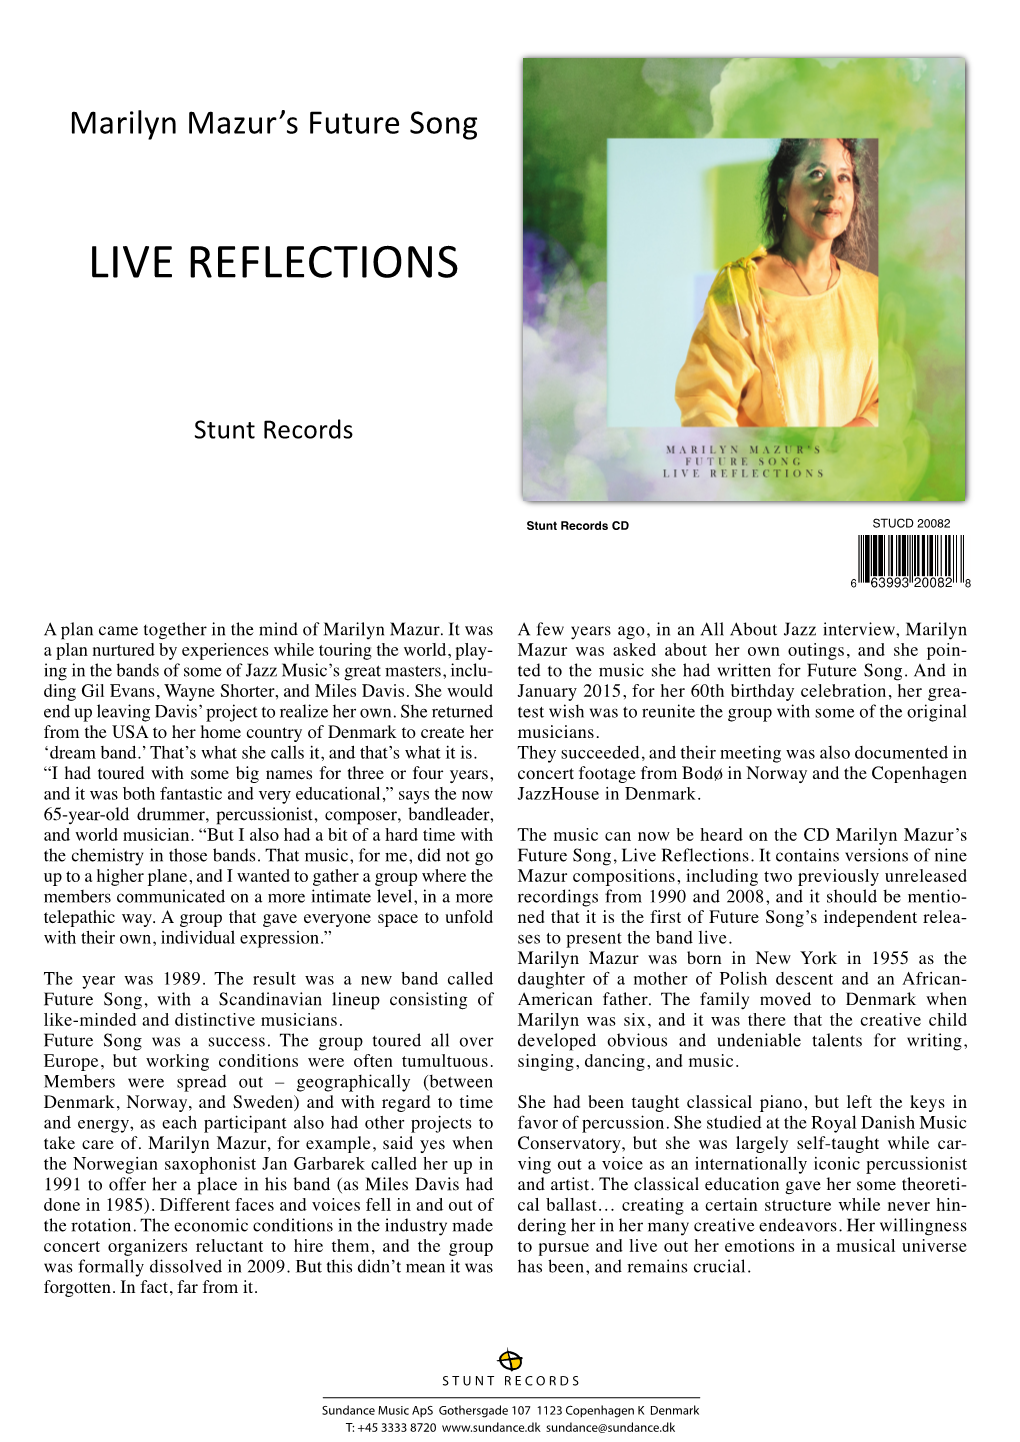 Live Reflections